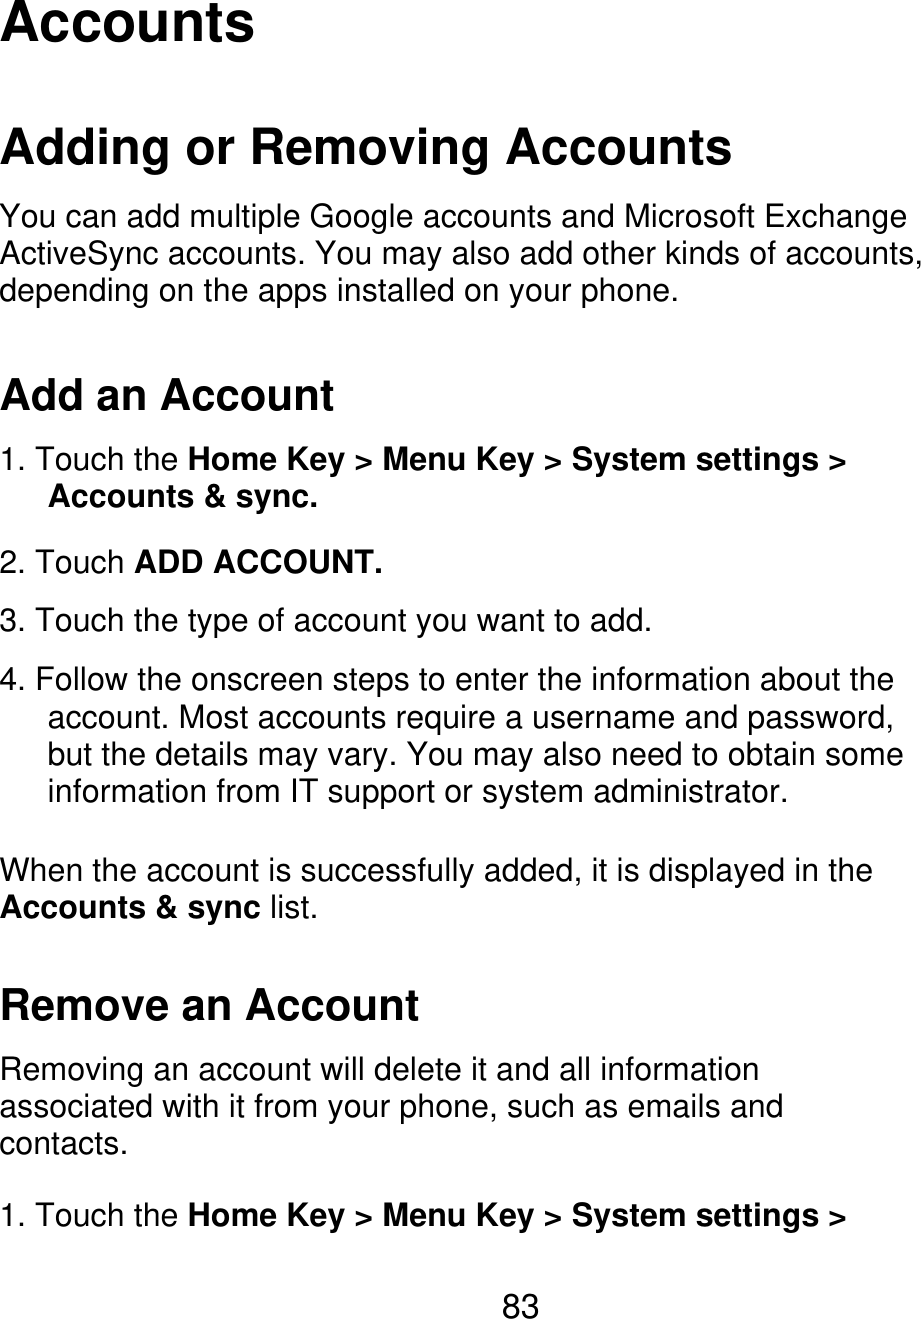 Accounts Adding or Removing Accounts You can add multiple Google accounts and Microsoft Exchange ActiveSync accounts. You may also add other kinds of accounts, depending on the apps installed on your phone. Add an Account 1. Touch the Home Key &gt; Menu Key &gt; System settings &gt;    Accounts &amp; sync. 2. Touch ADD ACCOUNT. 3. Touch the type of account you want to add. 4. Follow the onscreen steps to enter the information about the       account. Most accounts require a username and password,       but the details may vary. You may also need to obtain some    information from IT support or system administrator. When the account is successfully added, it is displayed in the Accounts &amp; sync list. Remove an Account Removing an account will delete it and all information associated with it from your phone, such as emails and contacts. 1. Touch the Home Key &gt; Menu Key &gt; System settings &gt; 83 